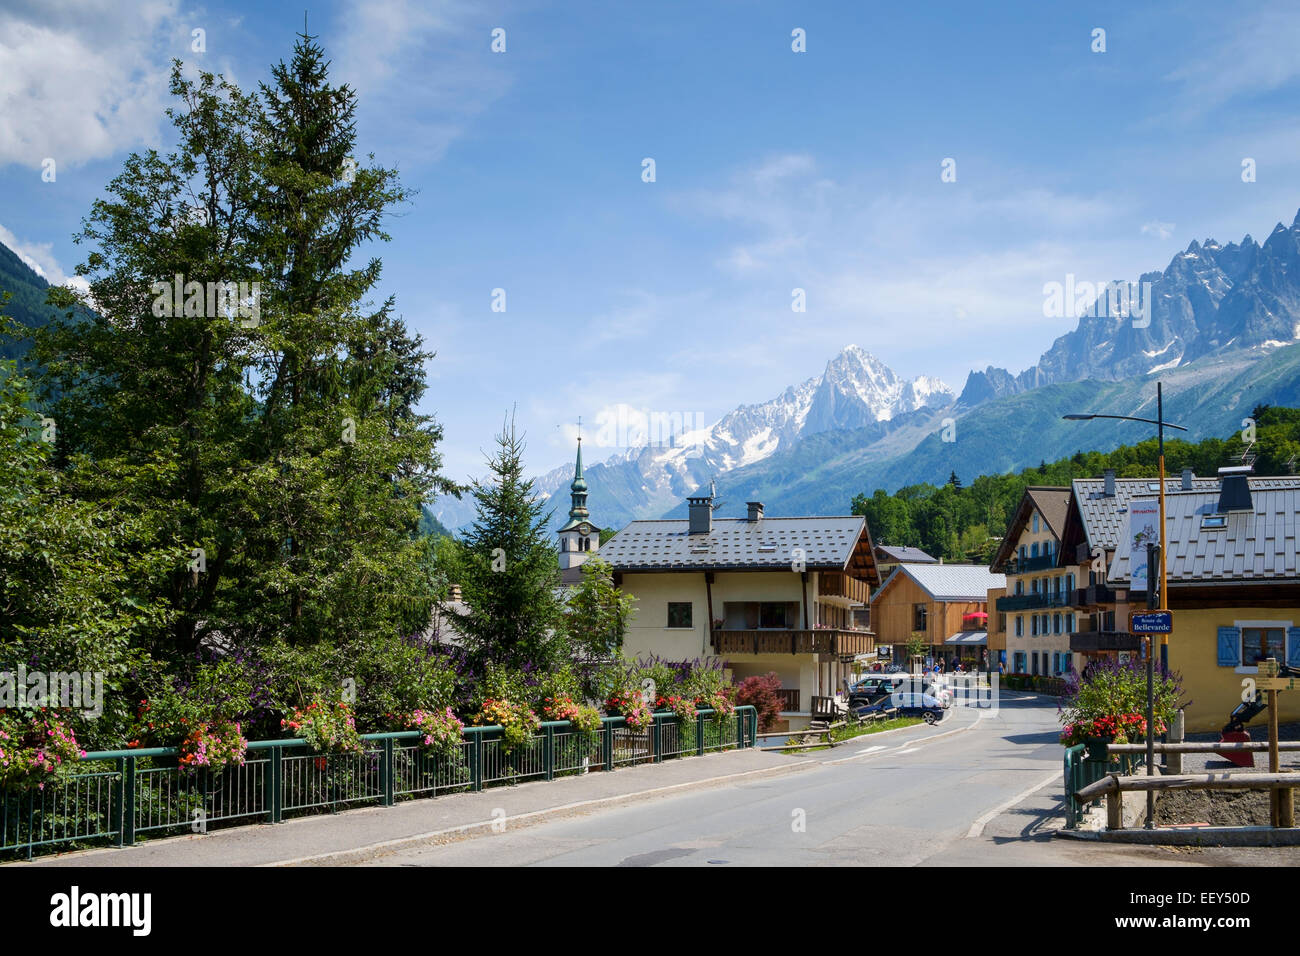 Les Houches village and Aiguille du Midi mountains in the background, Chamonix valley, French Alps, Haute-Savoie, France, Europe Stock Photo